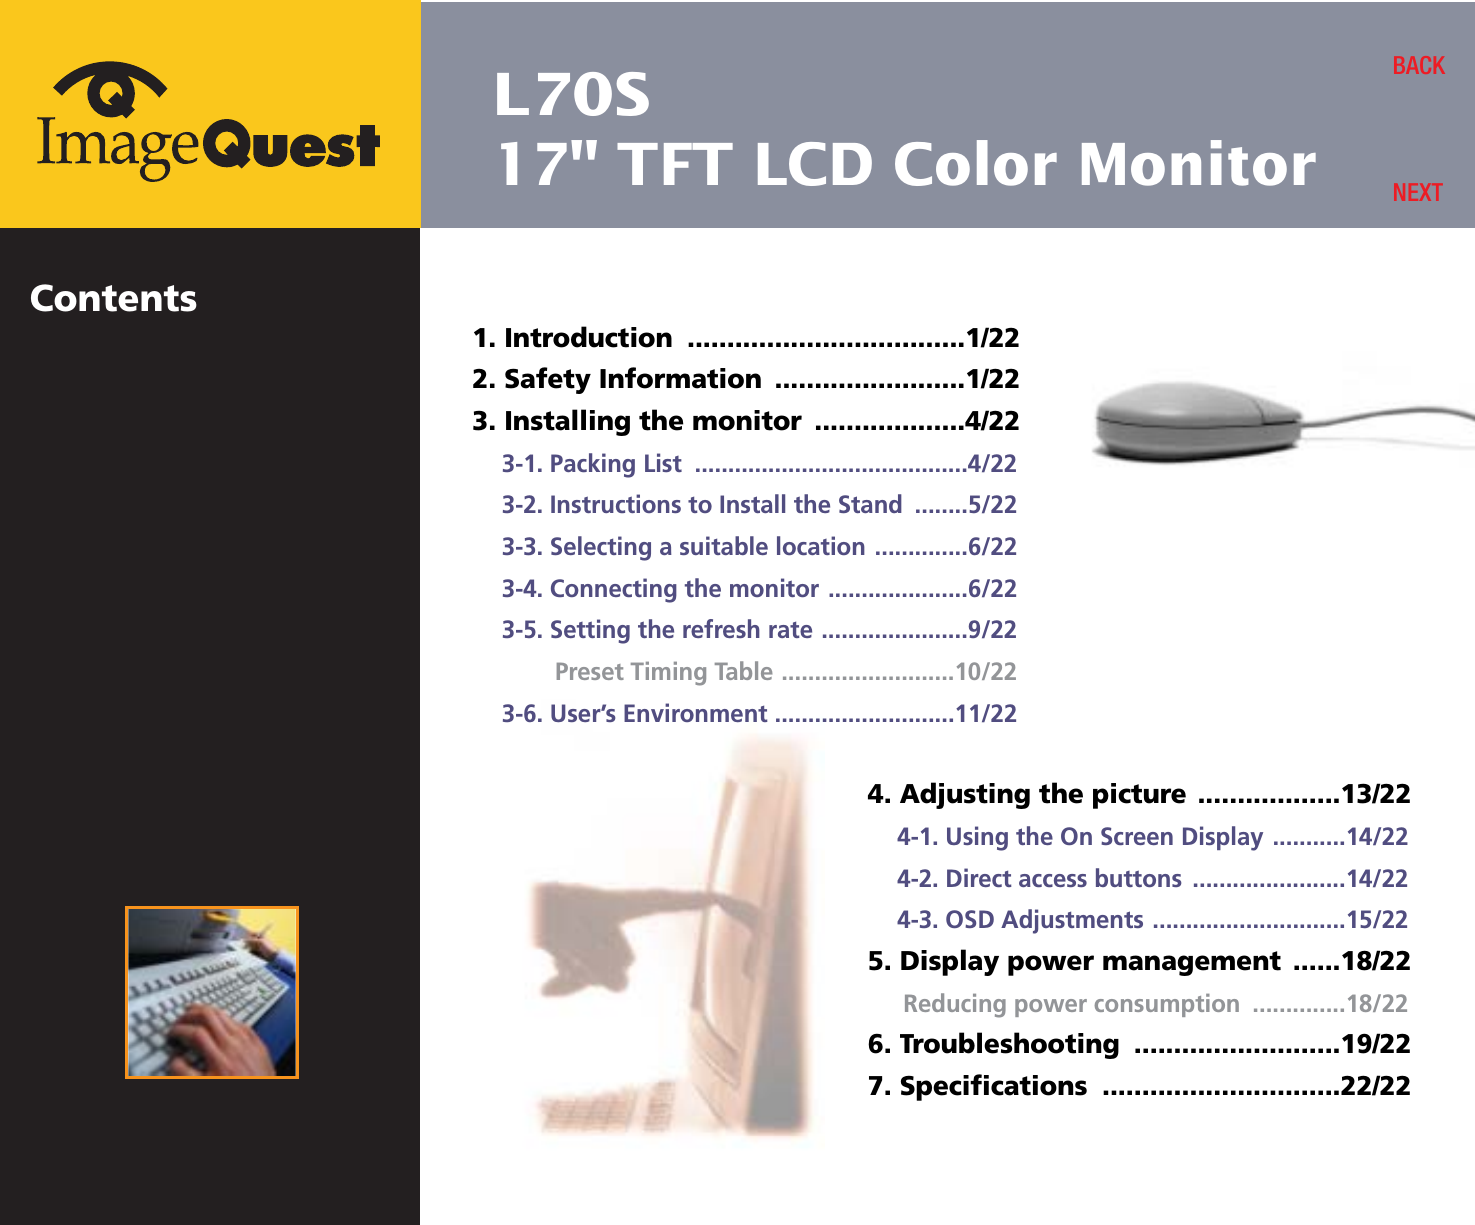 L70S17&quot; TFT LCD Color MonitorContents1. Introduction  ...................................1/222. Safety Information  ........................1/223. Installing the monitor  ...................4/223-1. Packing List  .........................................4/223-2. Instructions to Install the Stand  ........5/223-3. Selecting a suitable location ..............6/223-4. Connecting the monitor .....................6/223-5. Setting the refresh rate ......................9/22Preset Timing Table ..........................10/223-6. User’s Environment ...........................11/22BACKNEXT4. Adjusting the picture ..................13/224-1. Using the On Screen Display ...........14/224-2. Direct access buttons .......................14/224-3. OSD Adjustments .............................15/225. Display power management  ......18/22Reducing power consumption  ..............18/226. Troubleshooting  ..........................19/227. Specifications  ..............................22/22